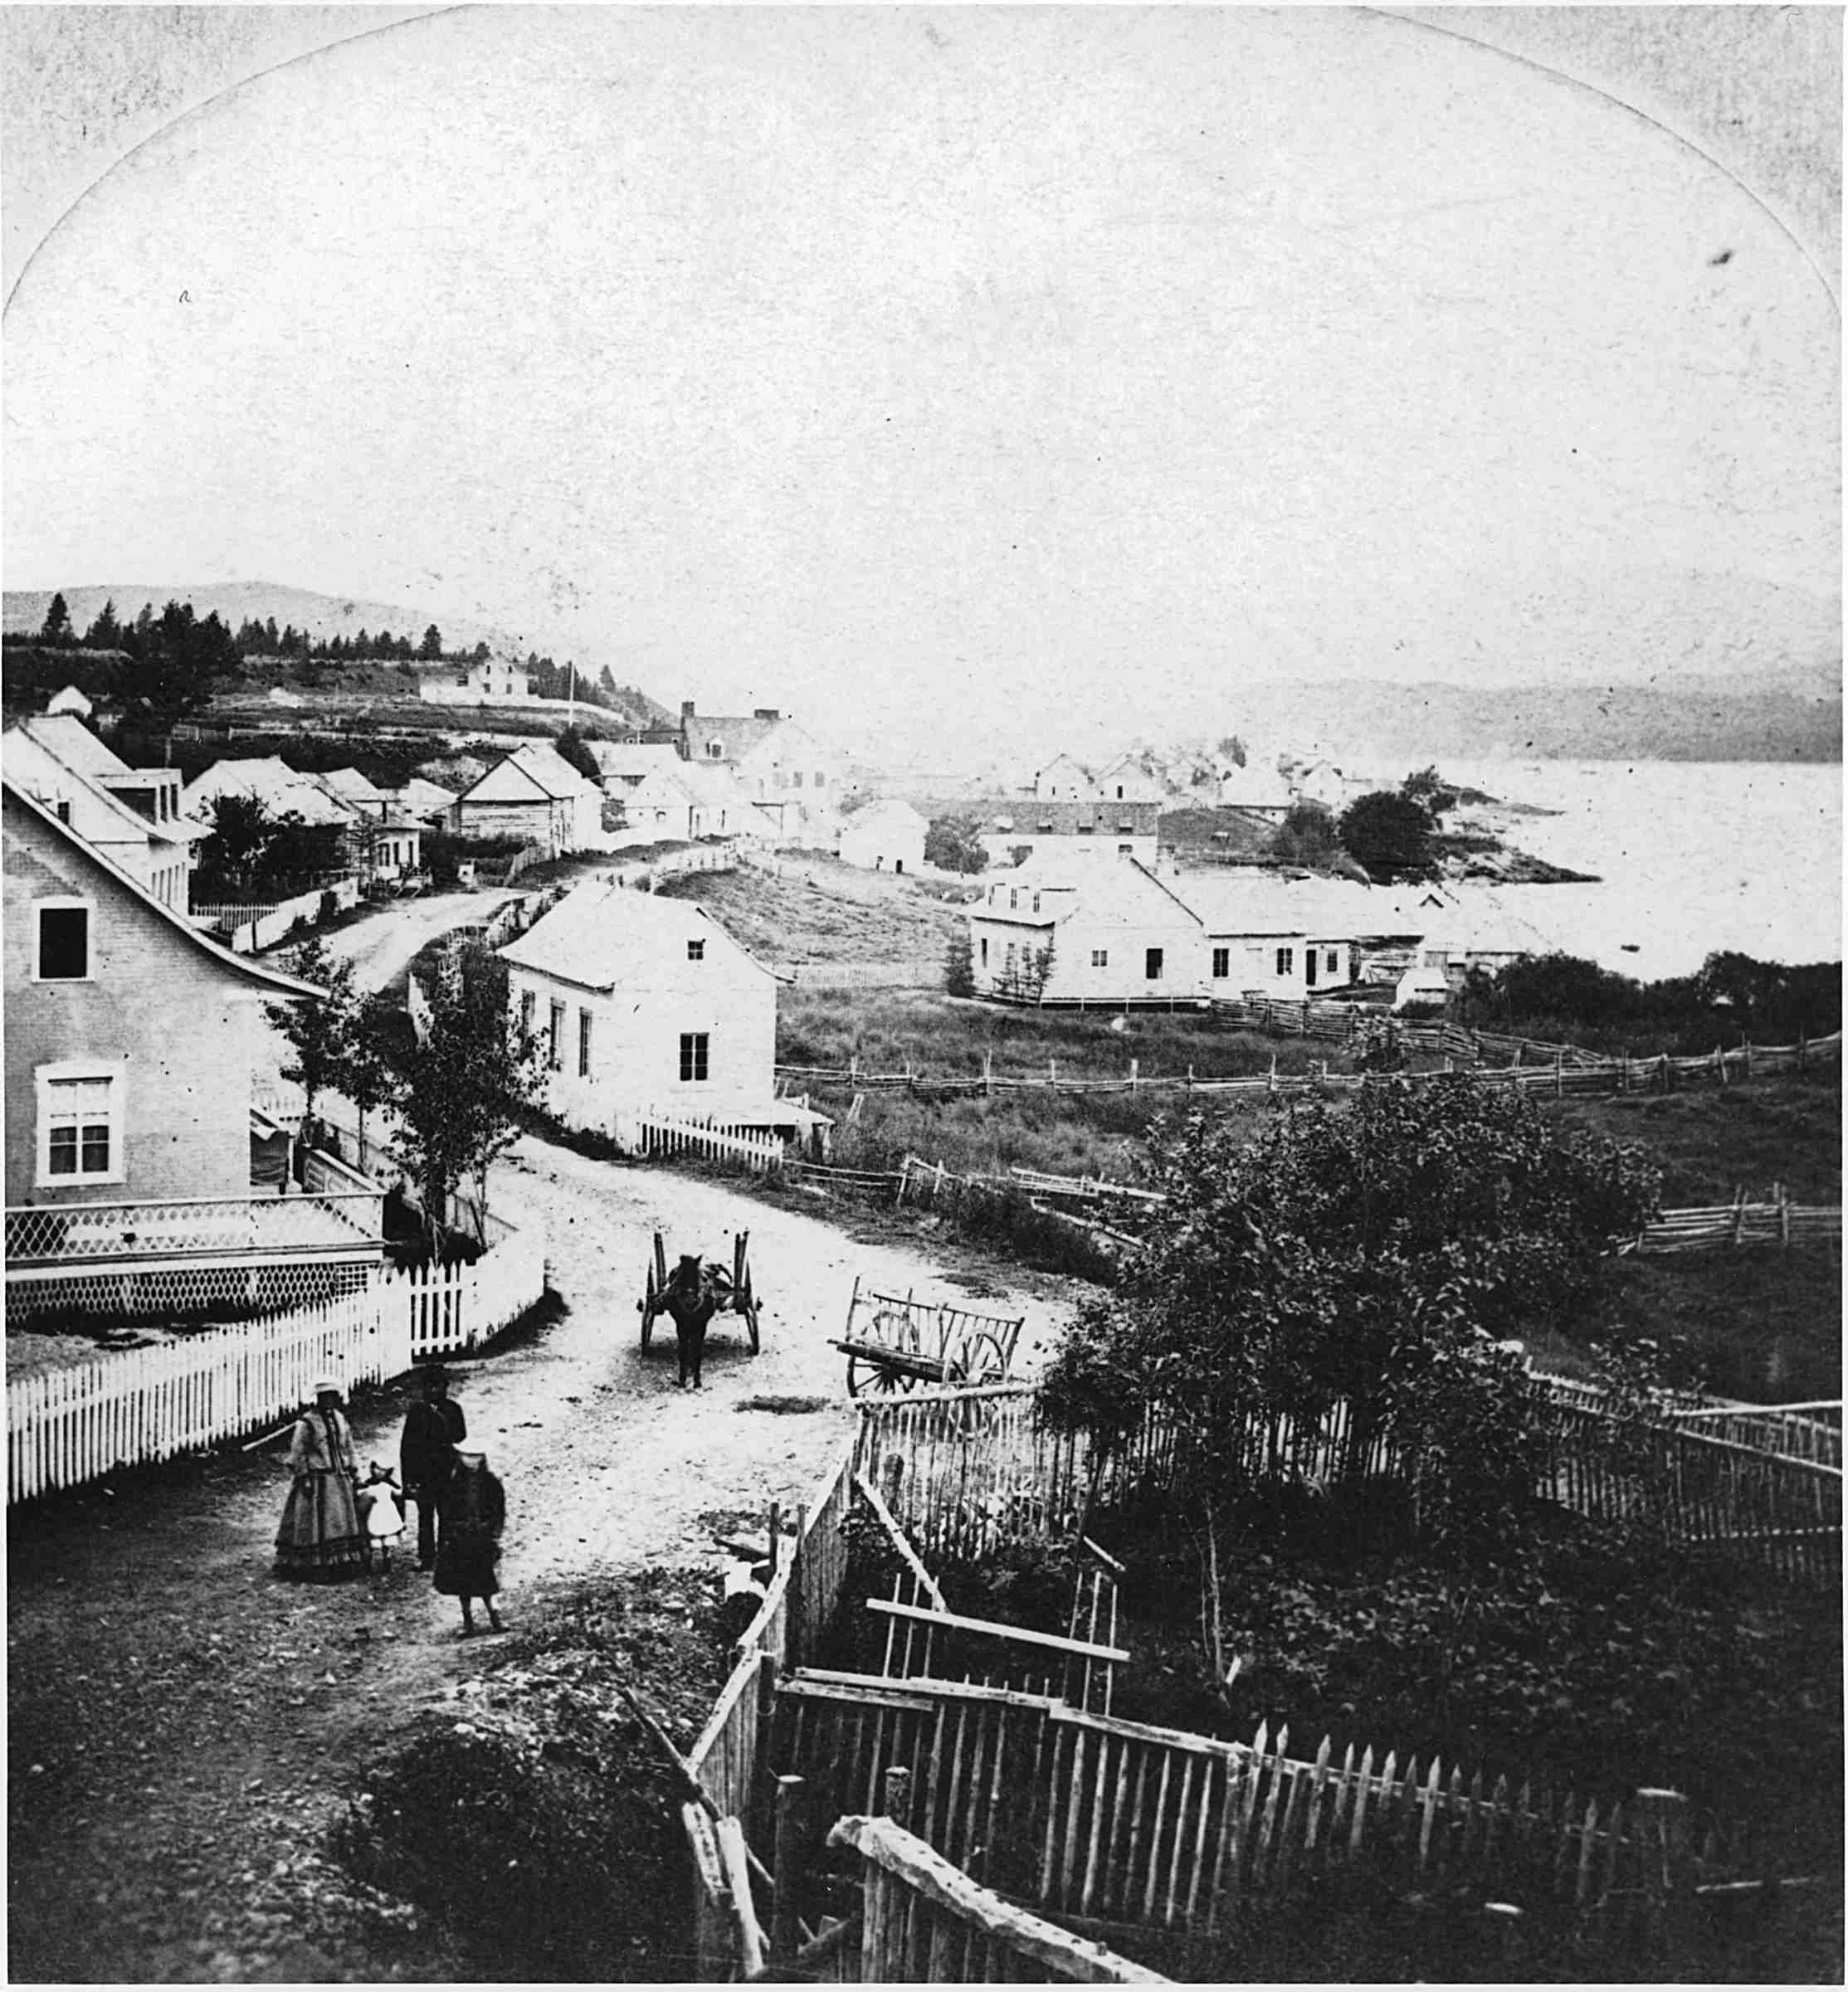 An old photograph of a hilly seaside village. A few people are in the street, near a harnessed horse.